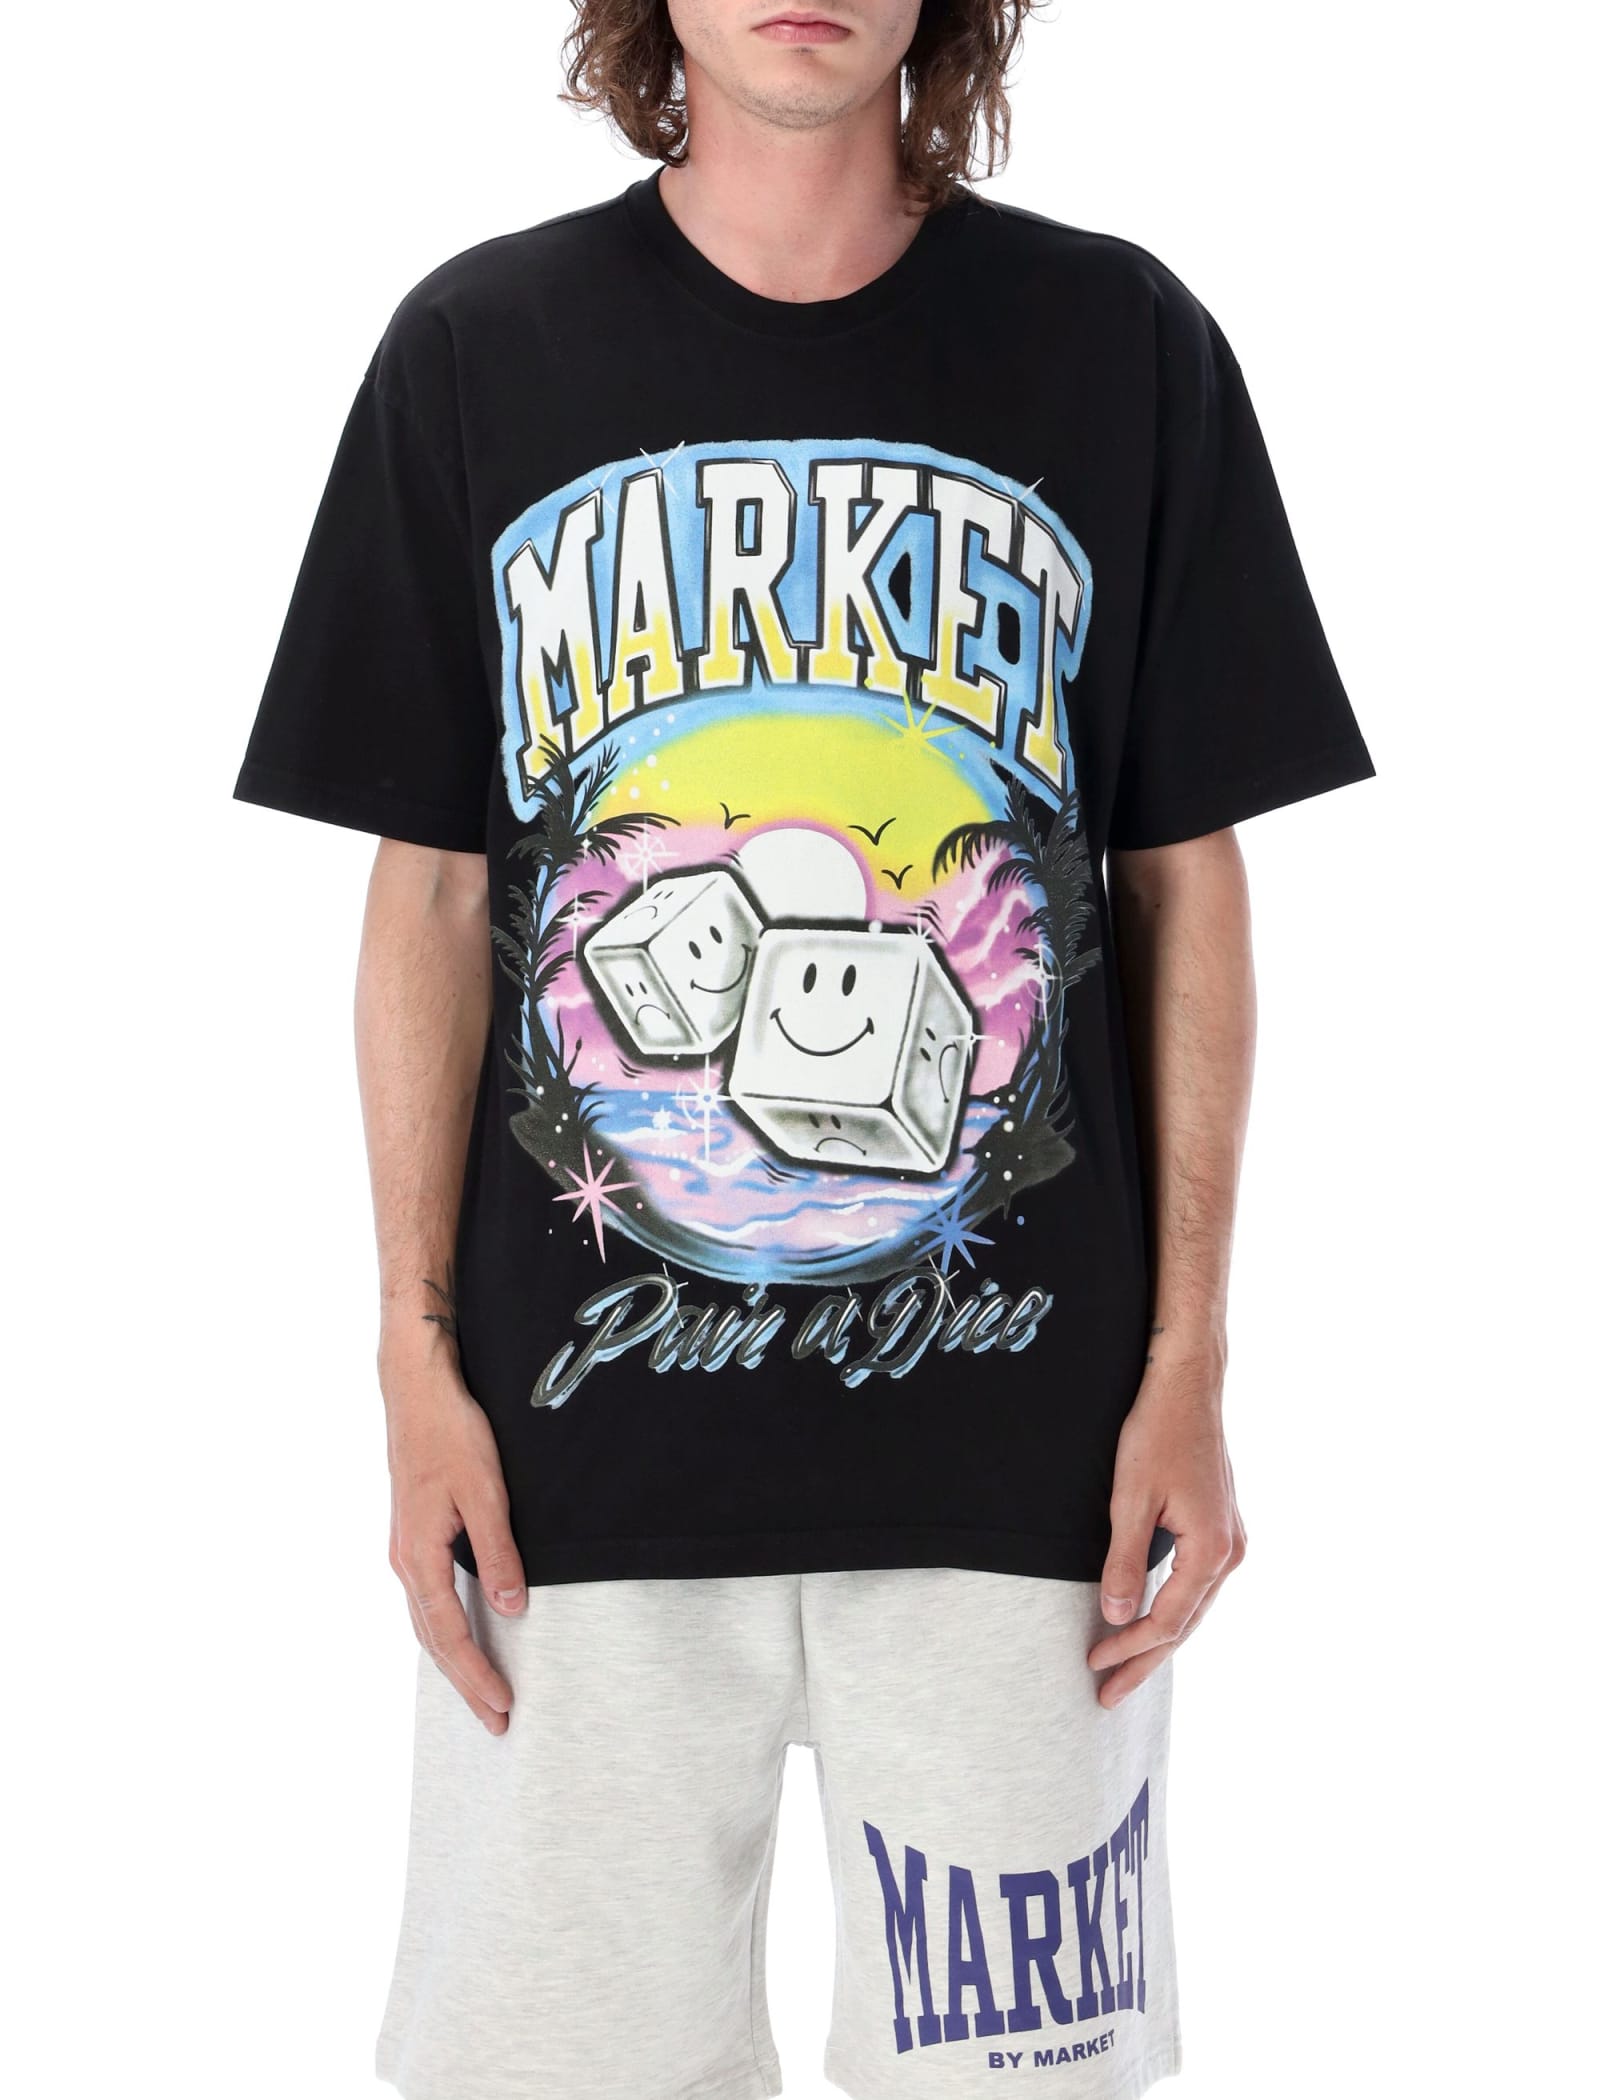 MARKET SMILEY PAIR OF DICE T-SHIRT